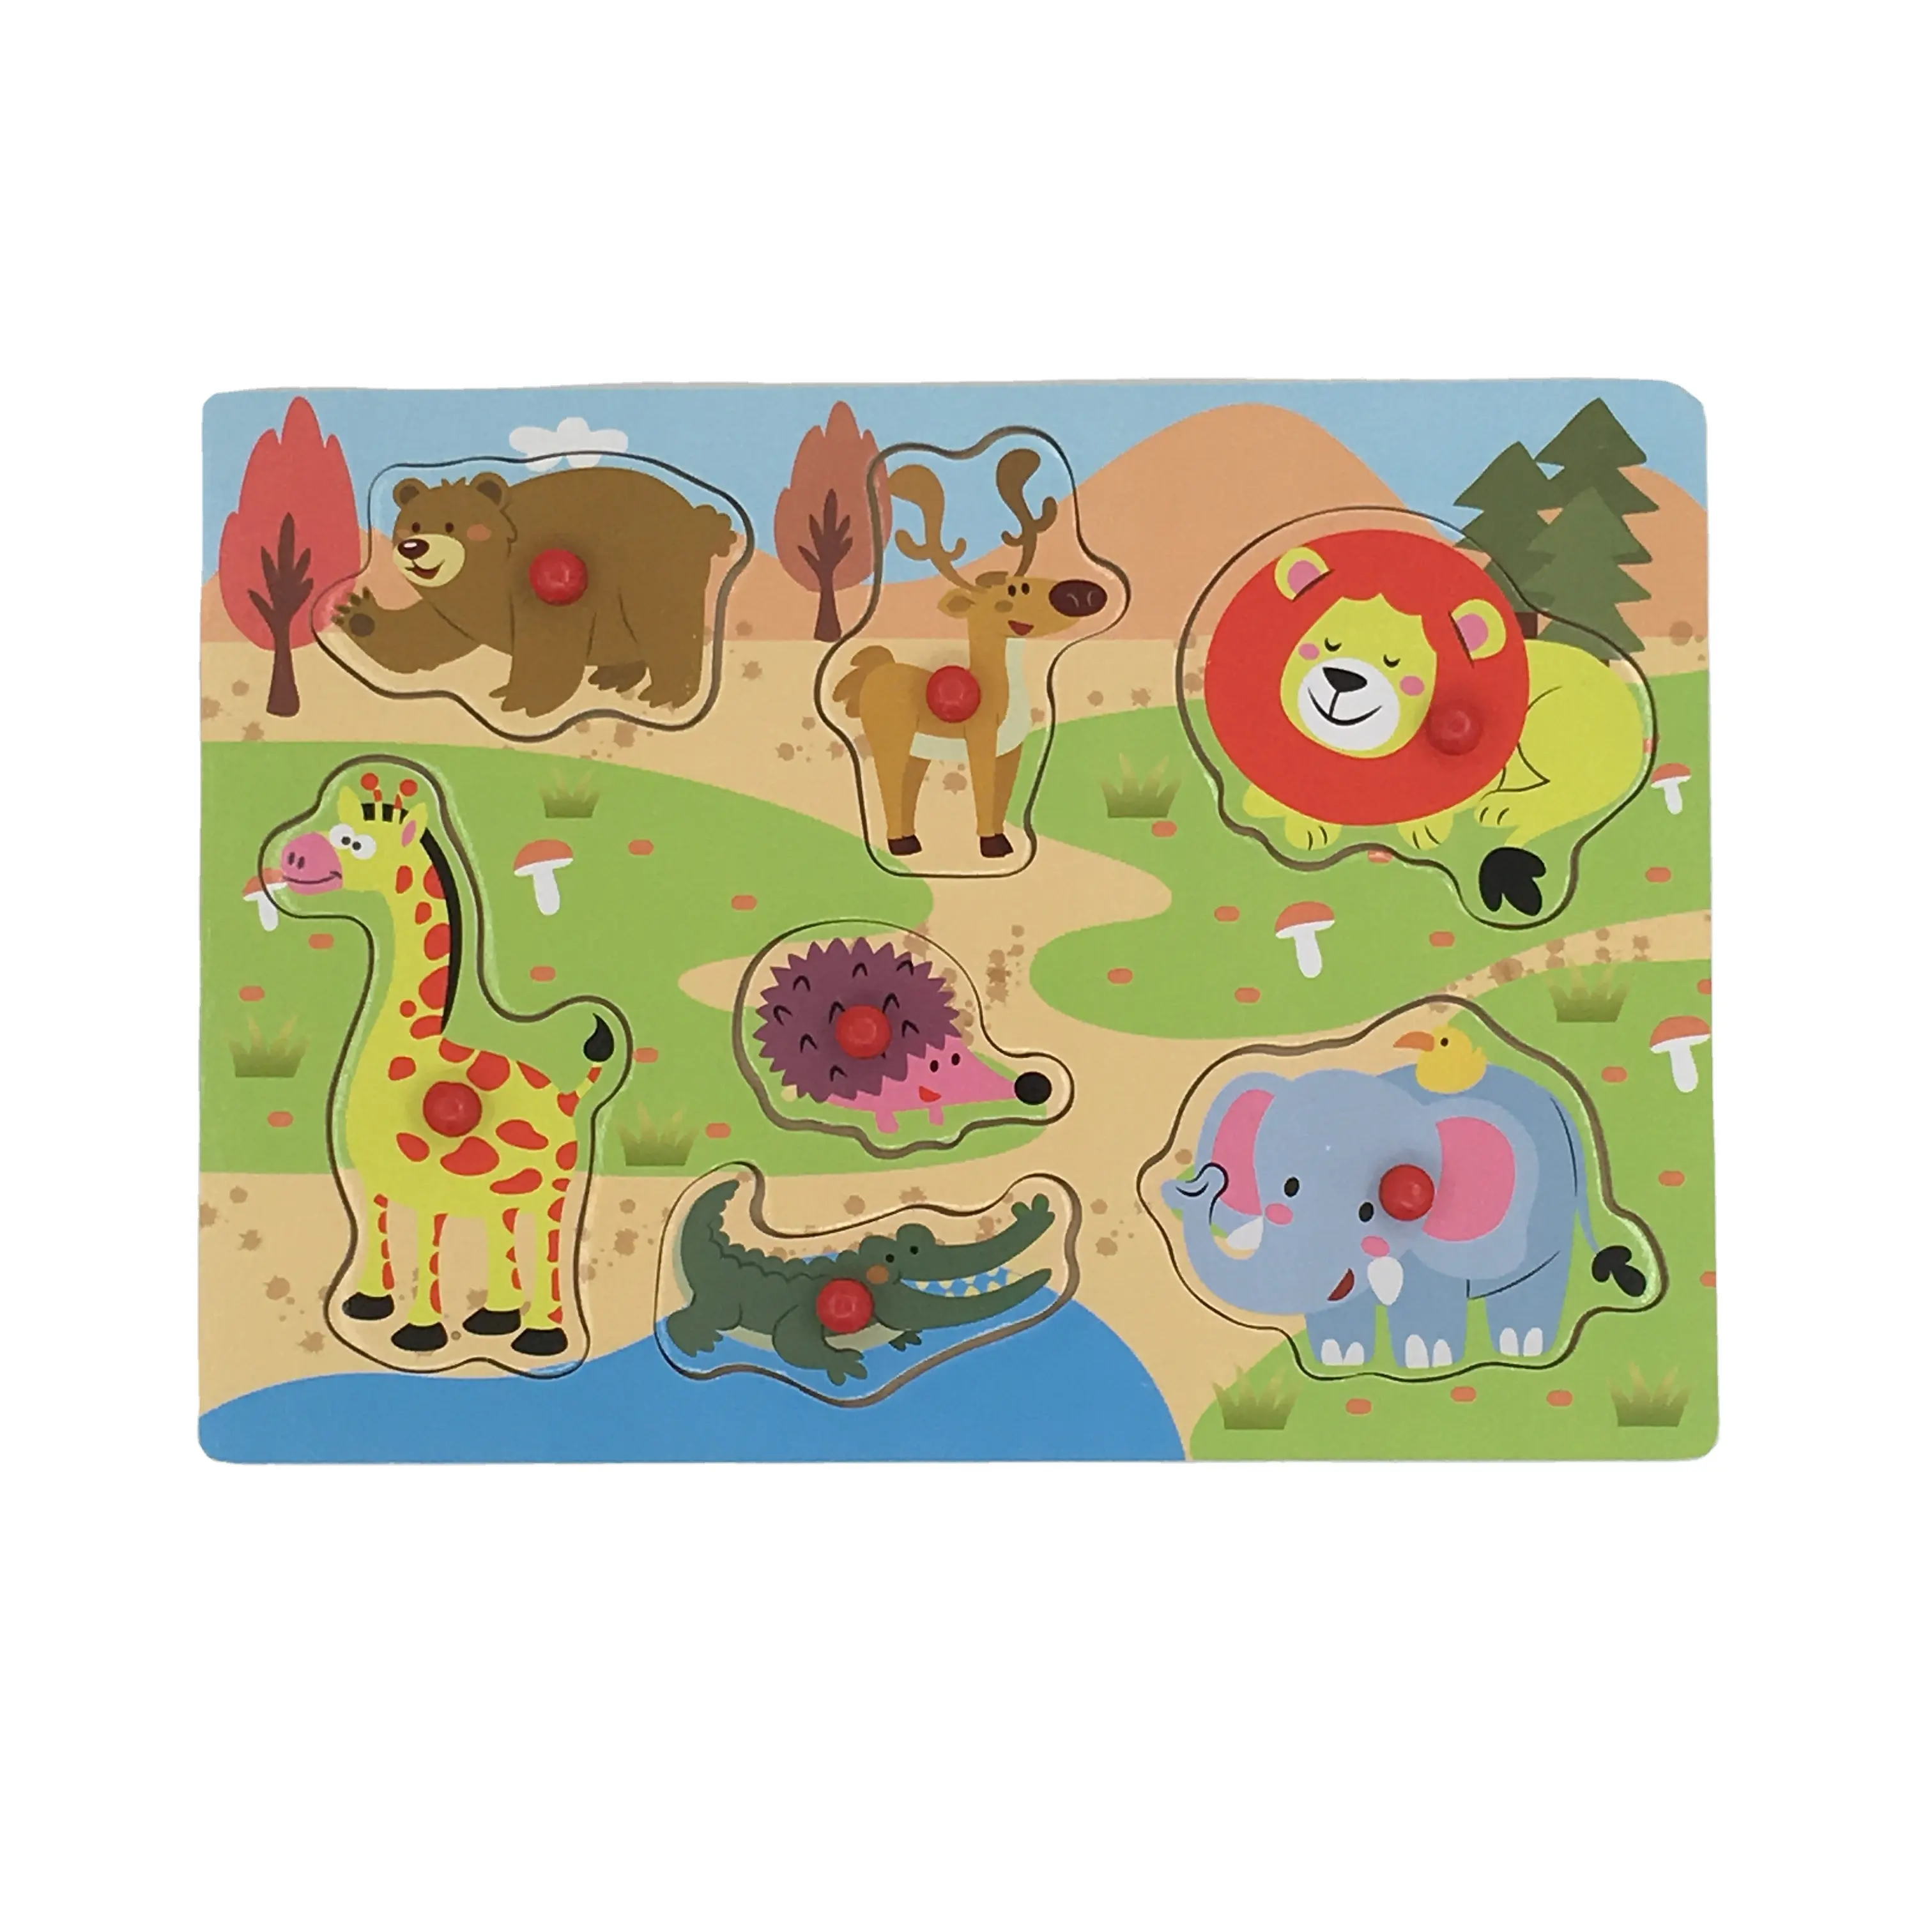 Preschool Toy Educational wooden Safari Puzzle With Plastic Knob For Kids